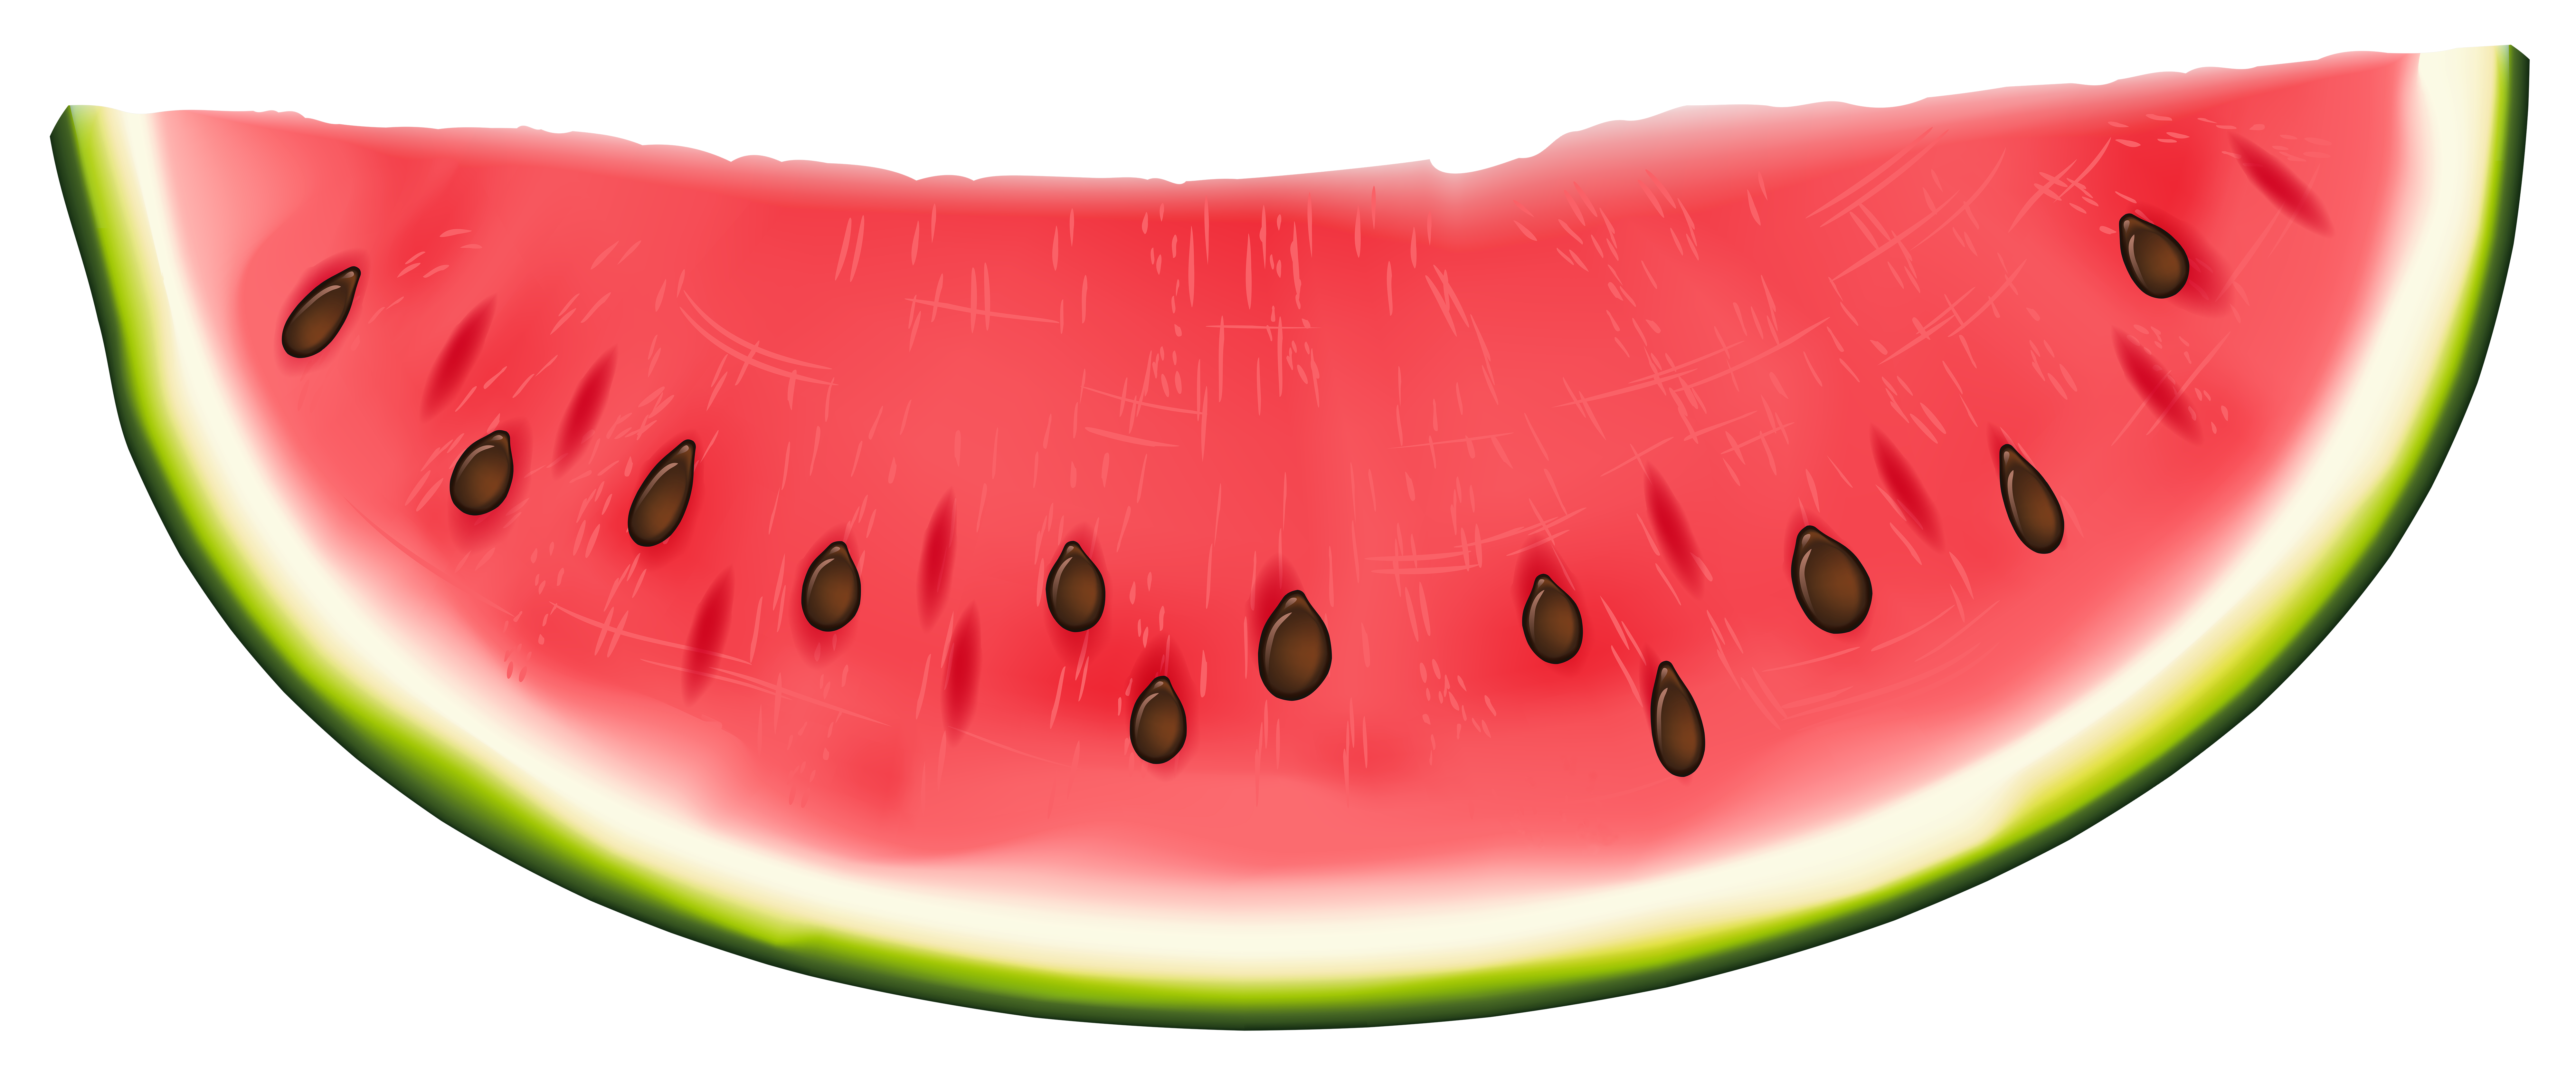 For to free images. Watermelon clipart printable